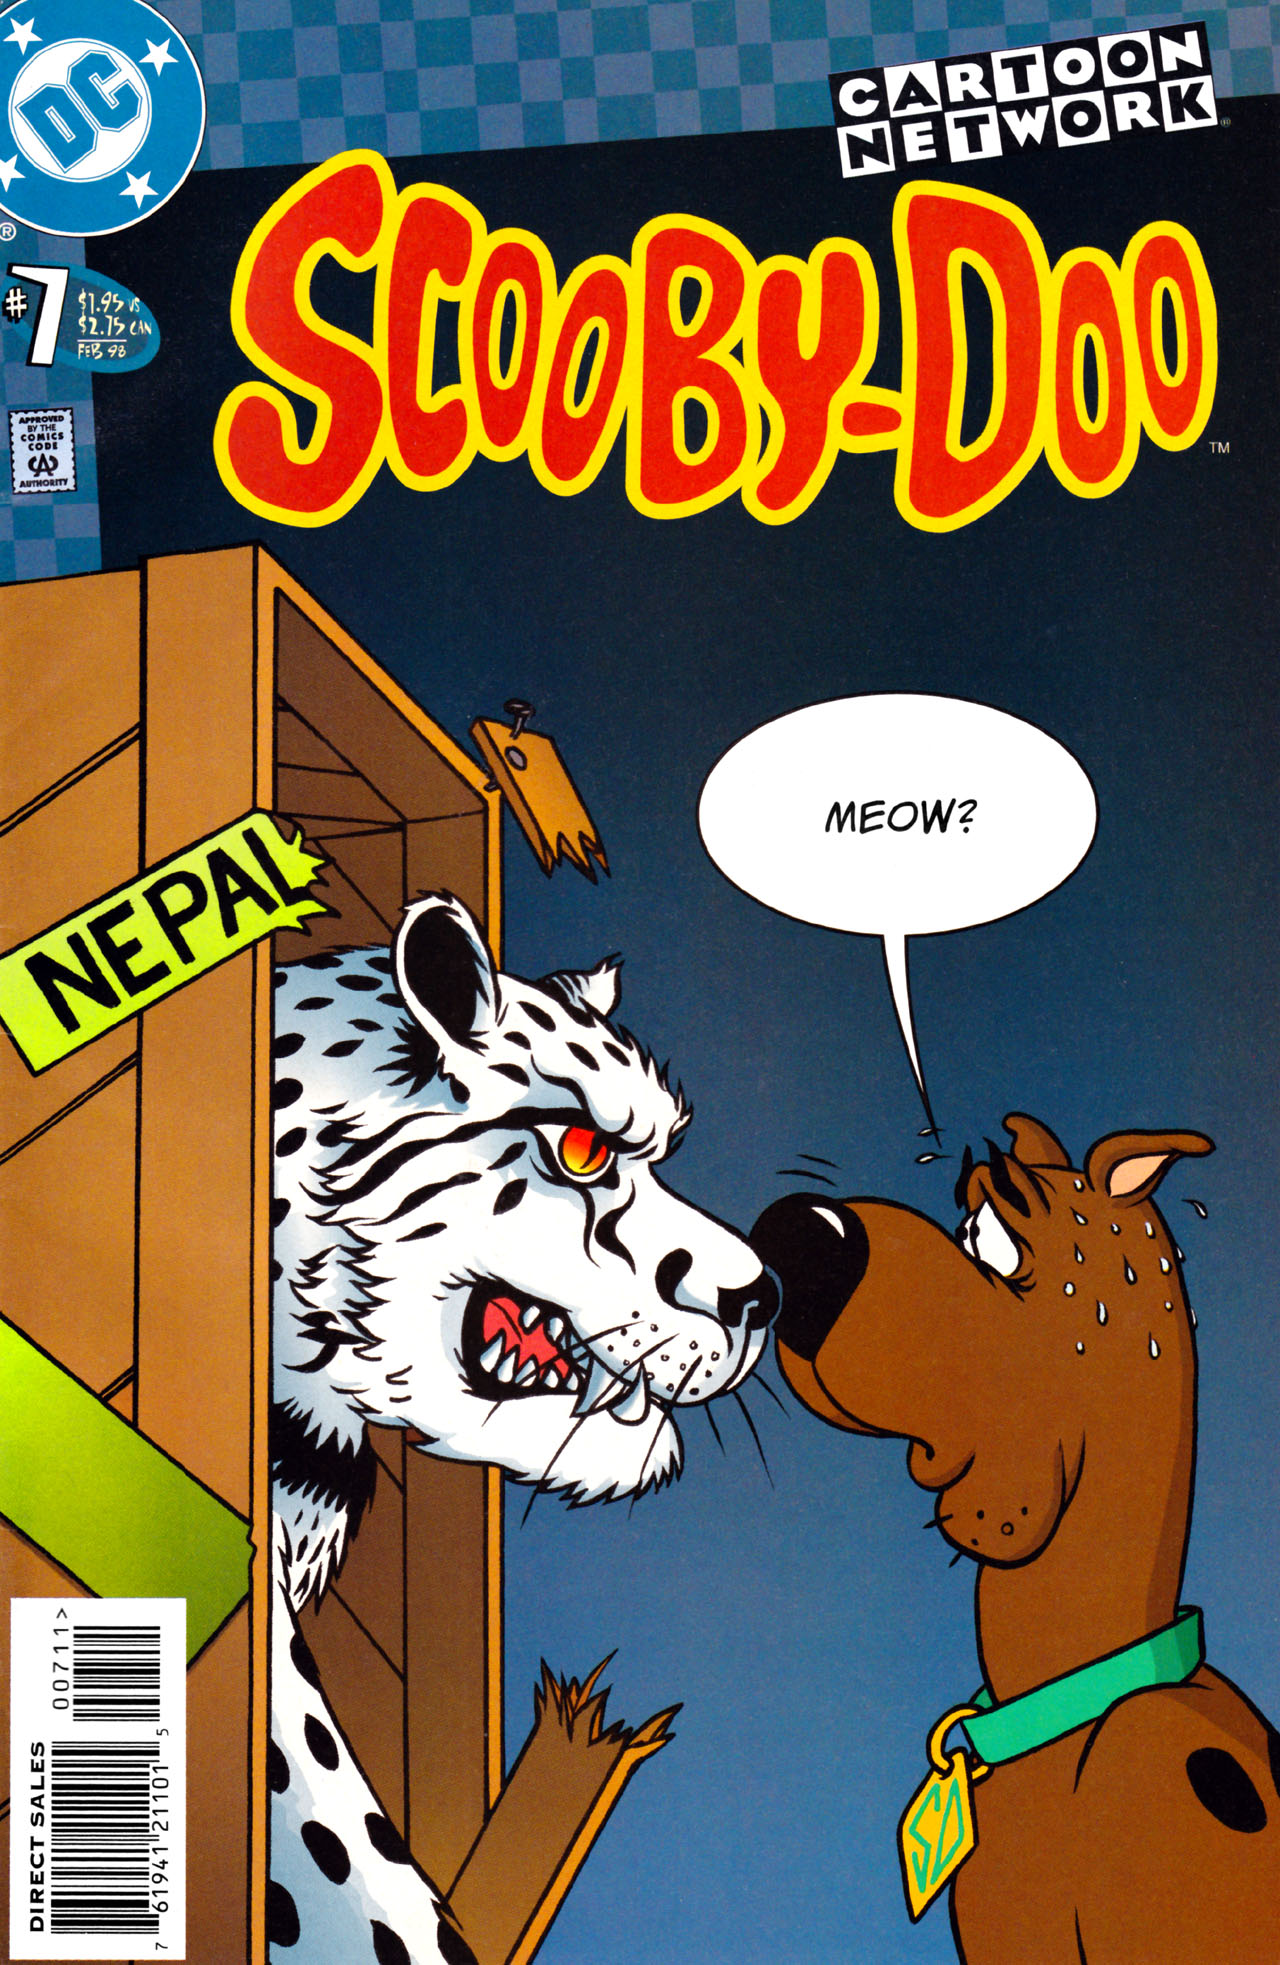 Scooby Doo 1997 Issue 7 Read Scooby Doo 1997 Issue 7 Comic Online In 